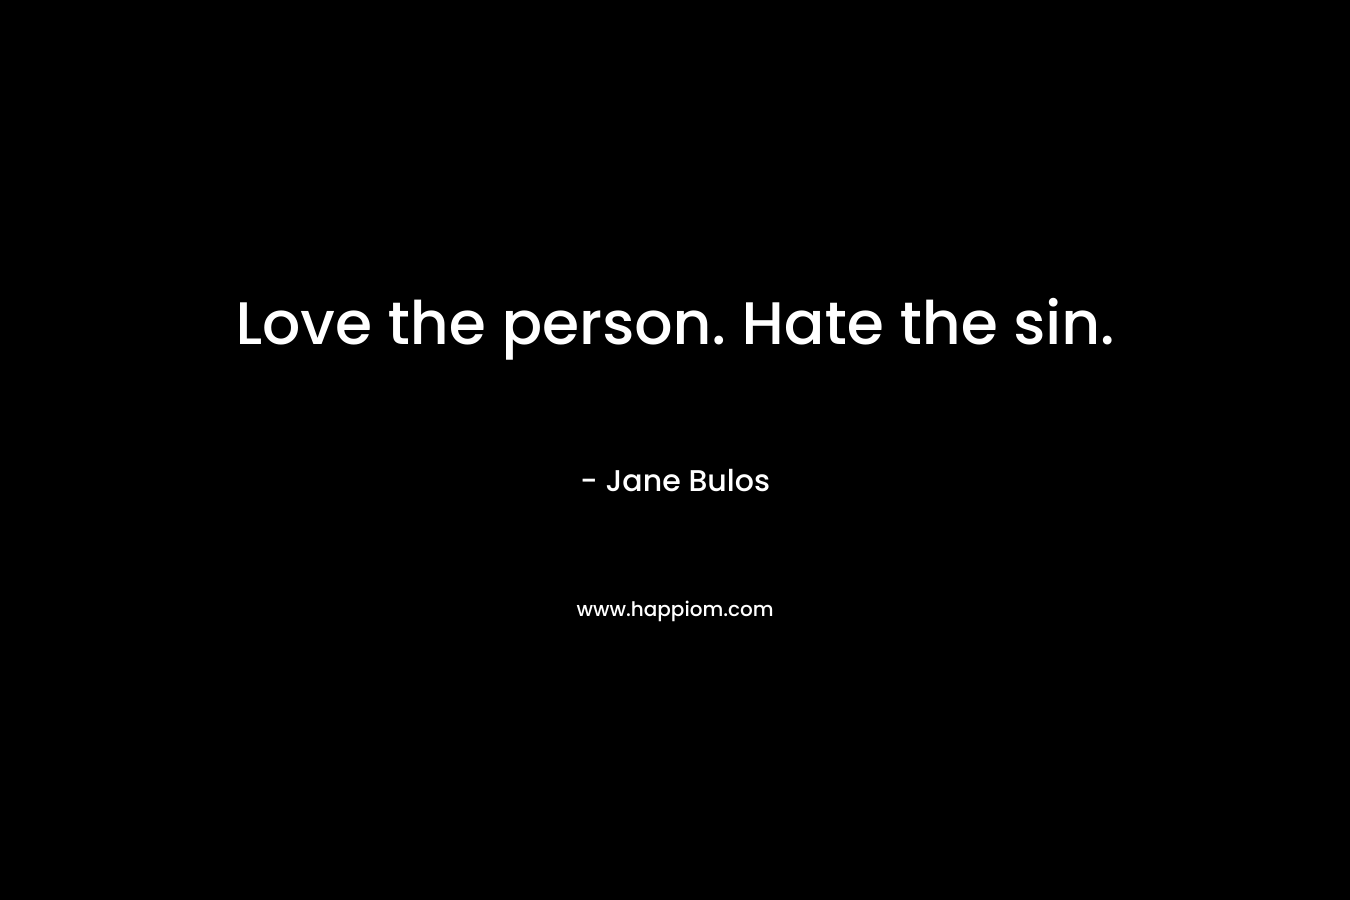 Love the person. Hate the sin.